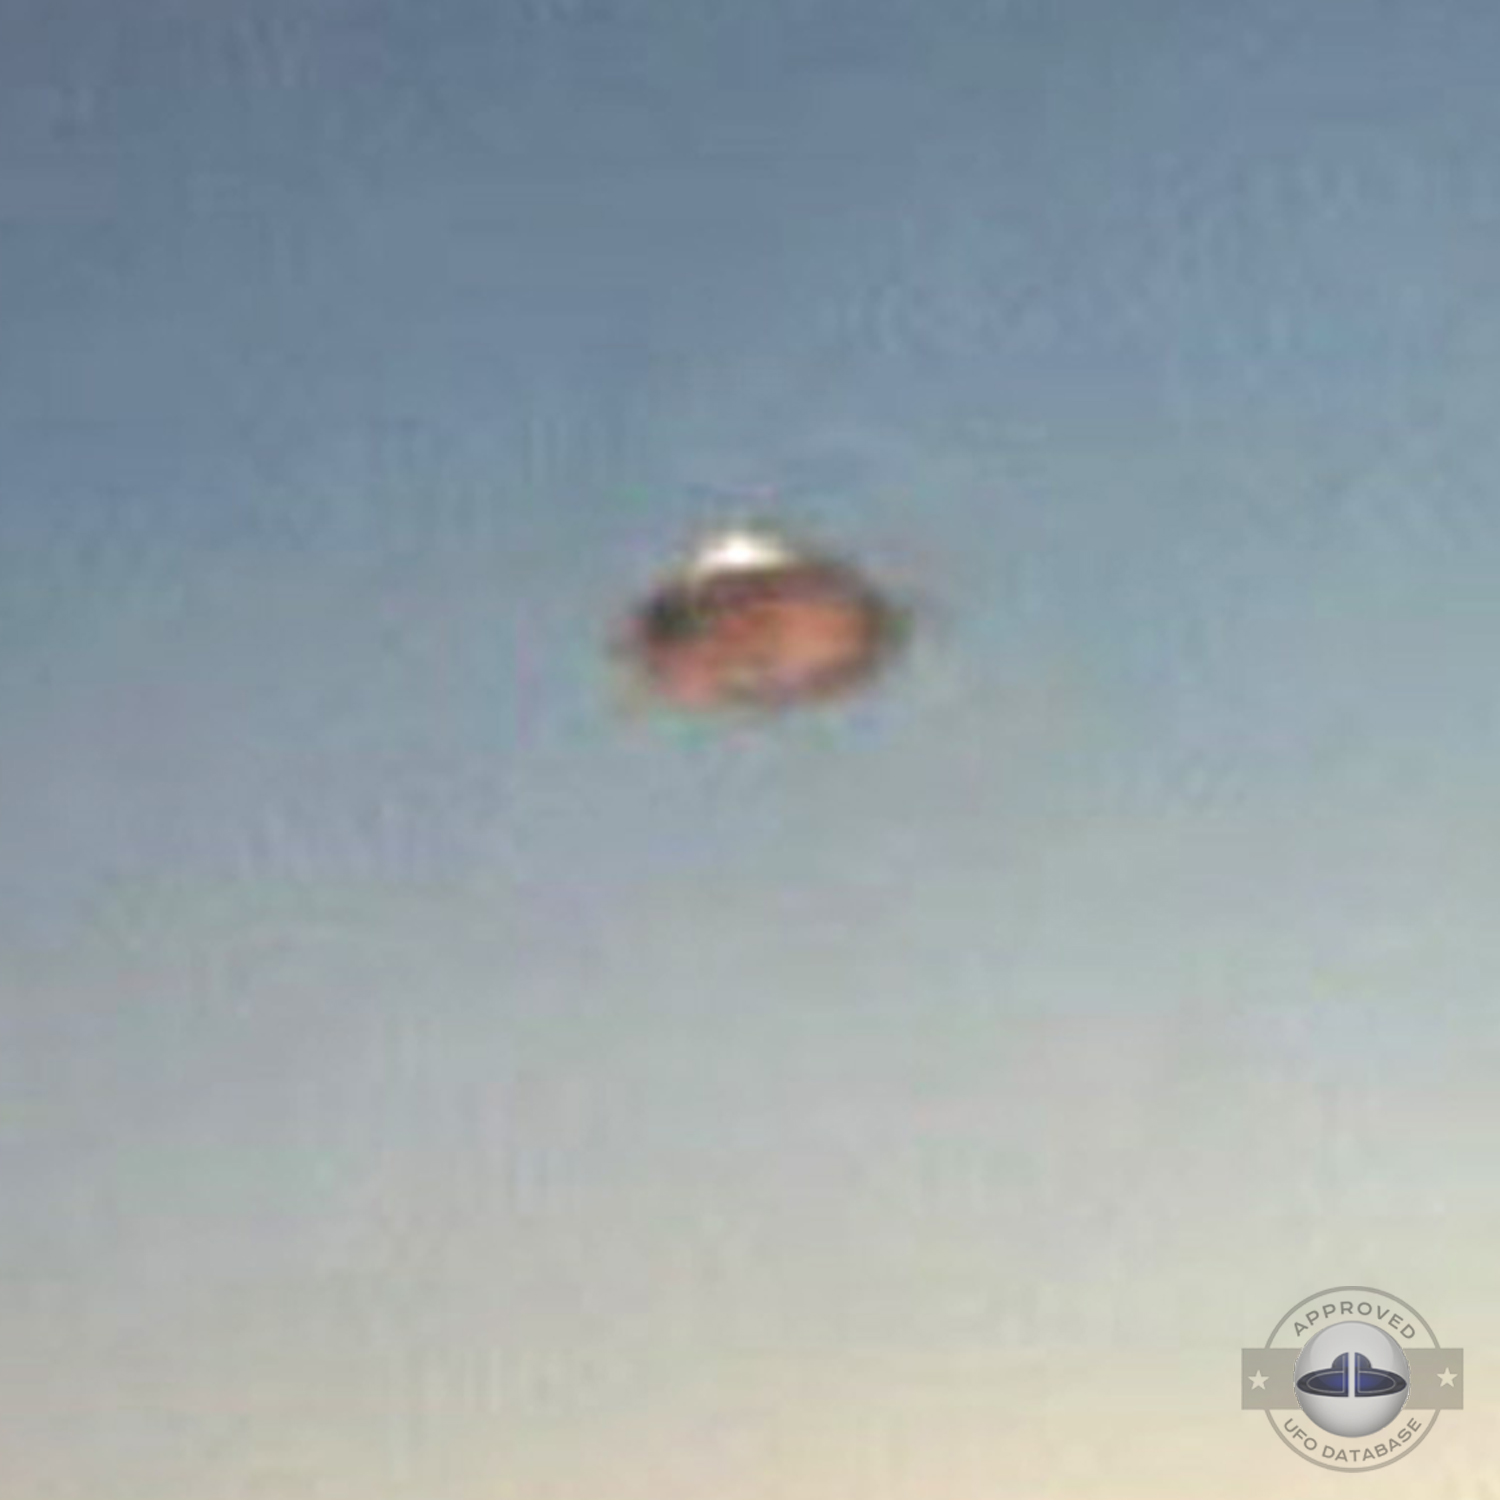 UFO Picture caught in bright day light over desertic mountains UFO Picture #30-3